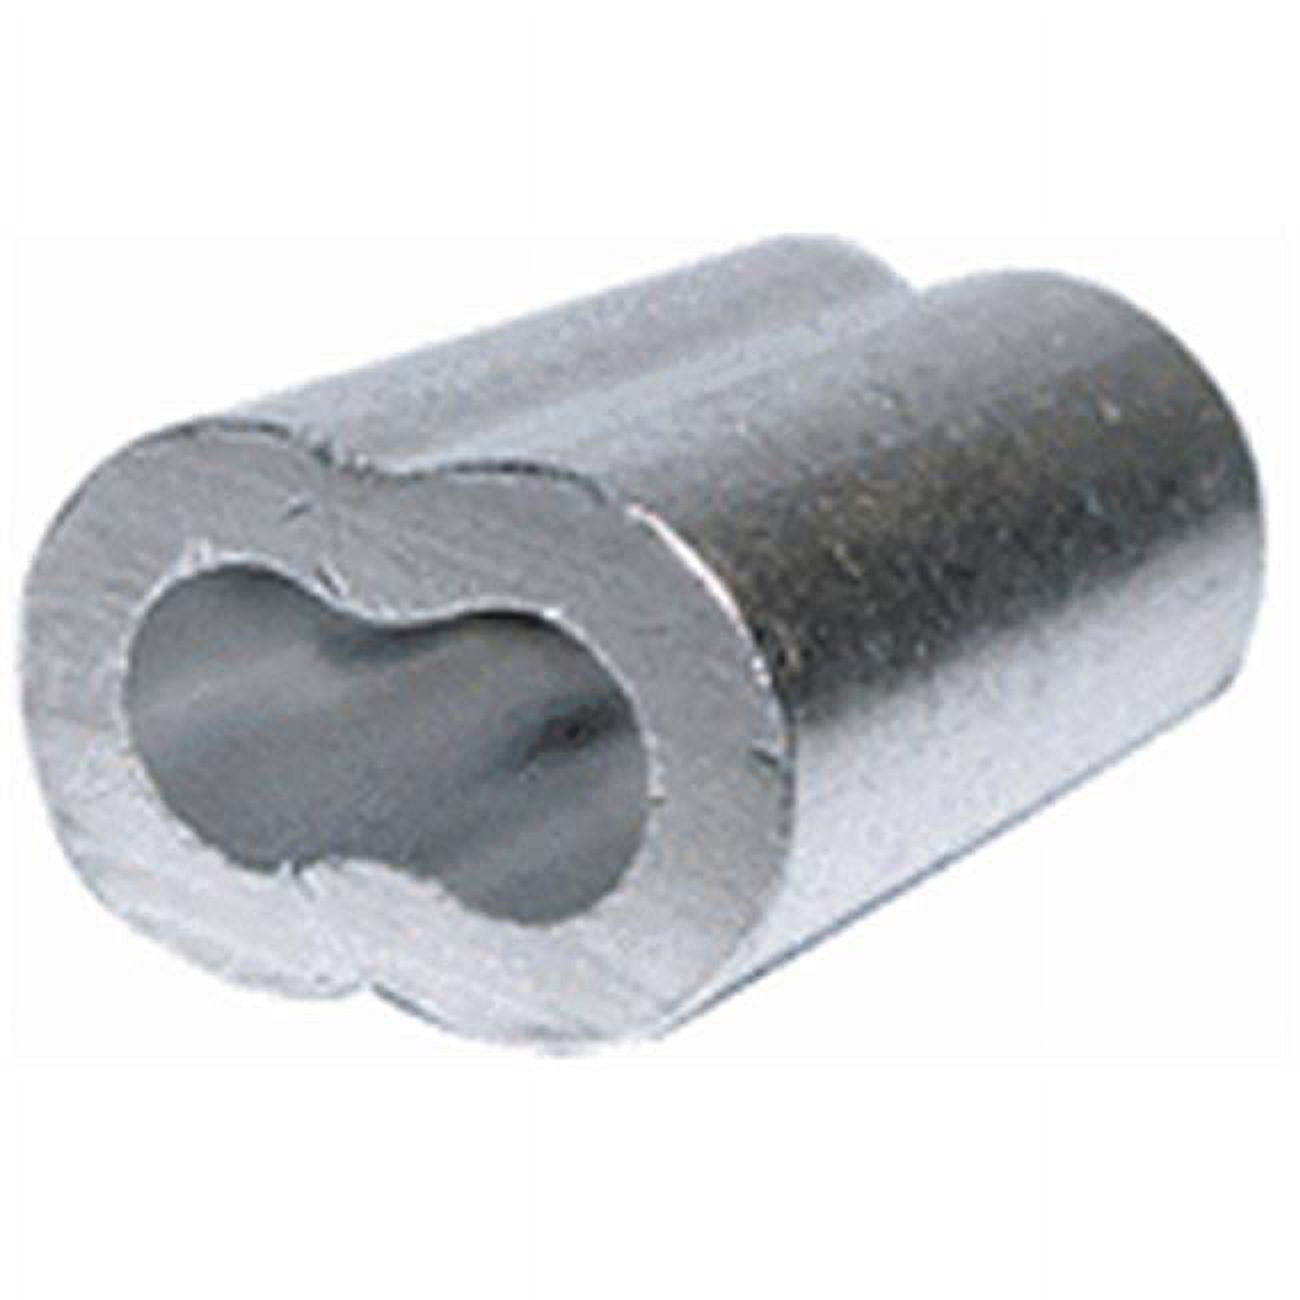 Picture of Apex 7670804 0.06 in. Aluminum Cable Ferrule - Pack of 50